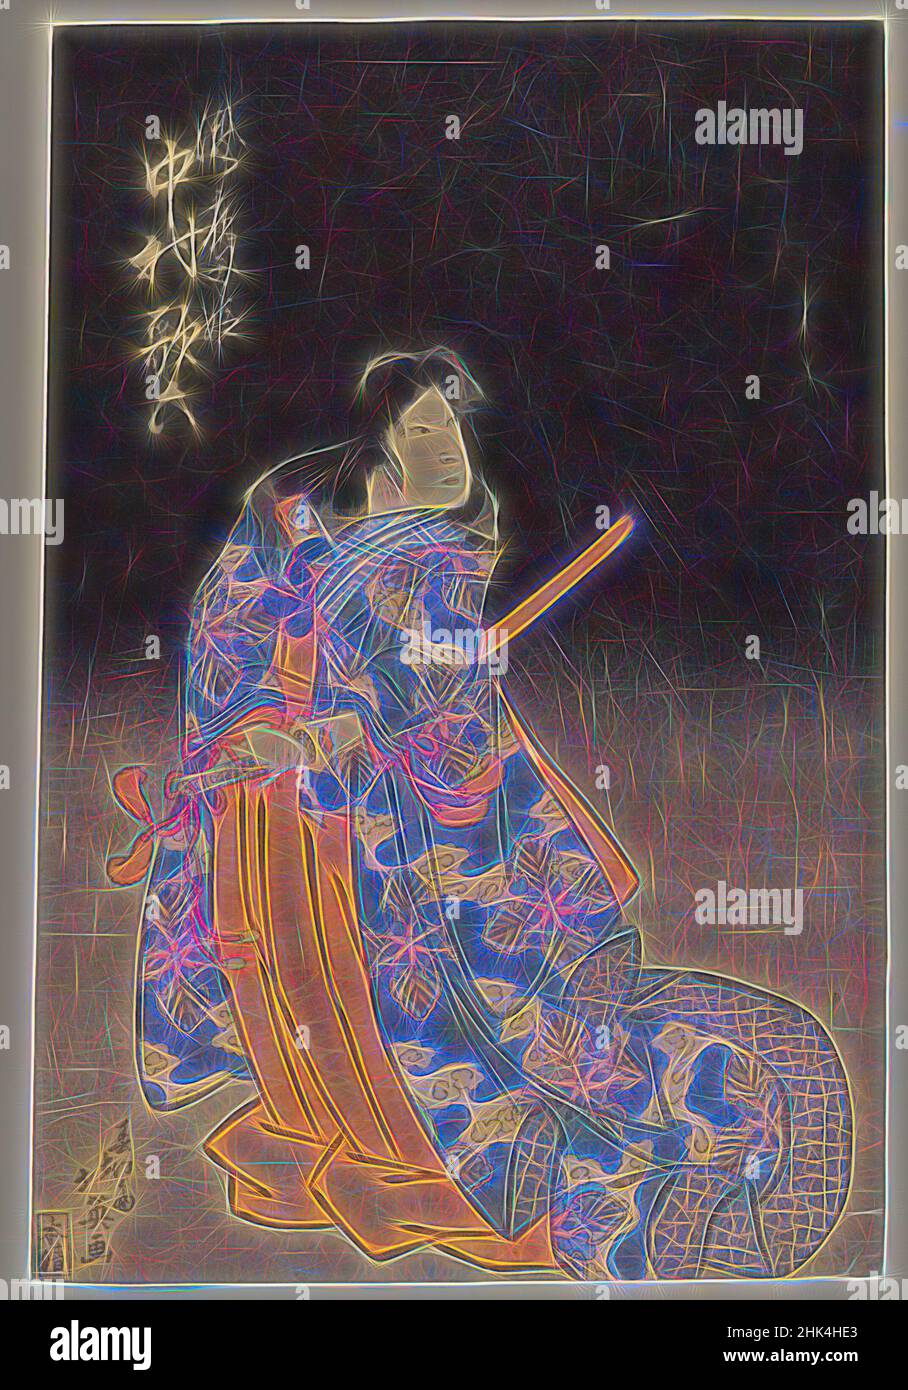 Inspired by Theatrical Male Character with Sword, Woodblock color print, Japan, mat: 13 7/16 x 9 1/16 in., 34.1 x 23 cm, Acting, Actor, Character, Costume, Edo Period, Japan, Japanese, Kabuki, Poetry, Samurai, Stage, Sword, Theatre, Ukiyo-e, Reimagined by Artotop. Classic art reinvented with a modern twist. Design of warm cheerful glowing of brightness and light ray radiance. Photography inspired by surrealism and futurism, embracing dynamic energy of modern technology, movement, speed and revolutionize culture Stock Photo